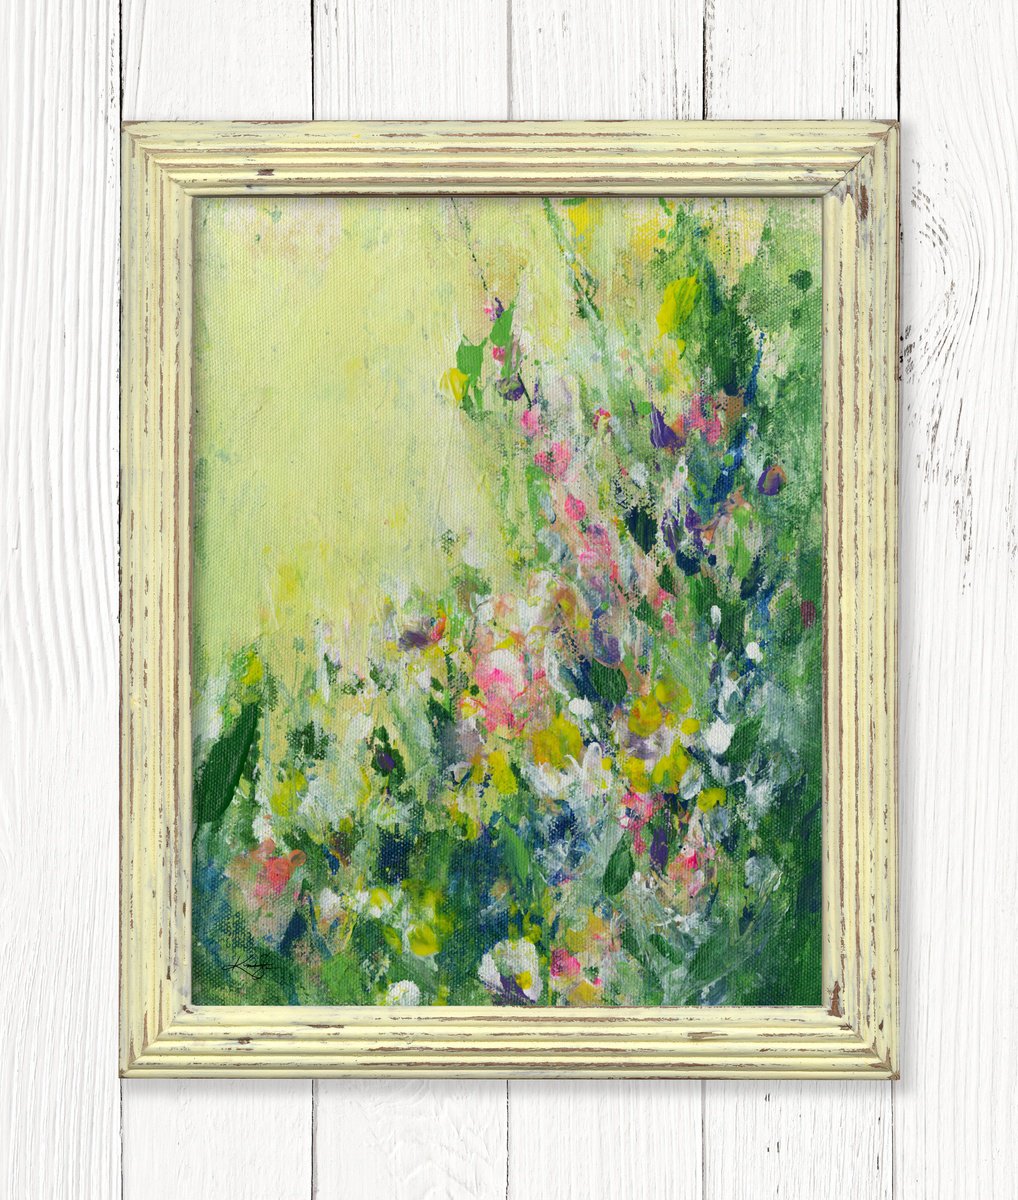 Shabby Chic Charm 28 - Framed Floral art in Painted Distressed Frame by Kathy Morton Stani... by Kathy Morton Stanion